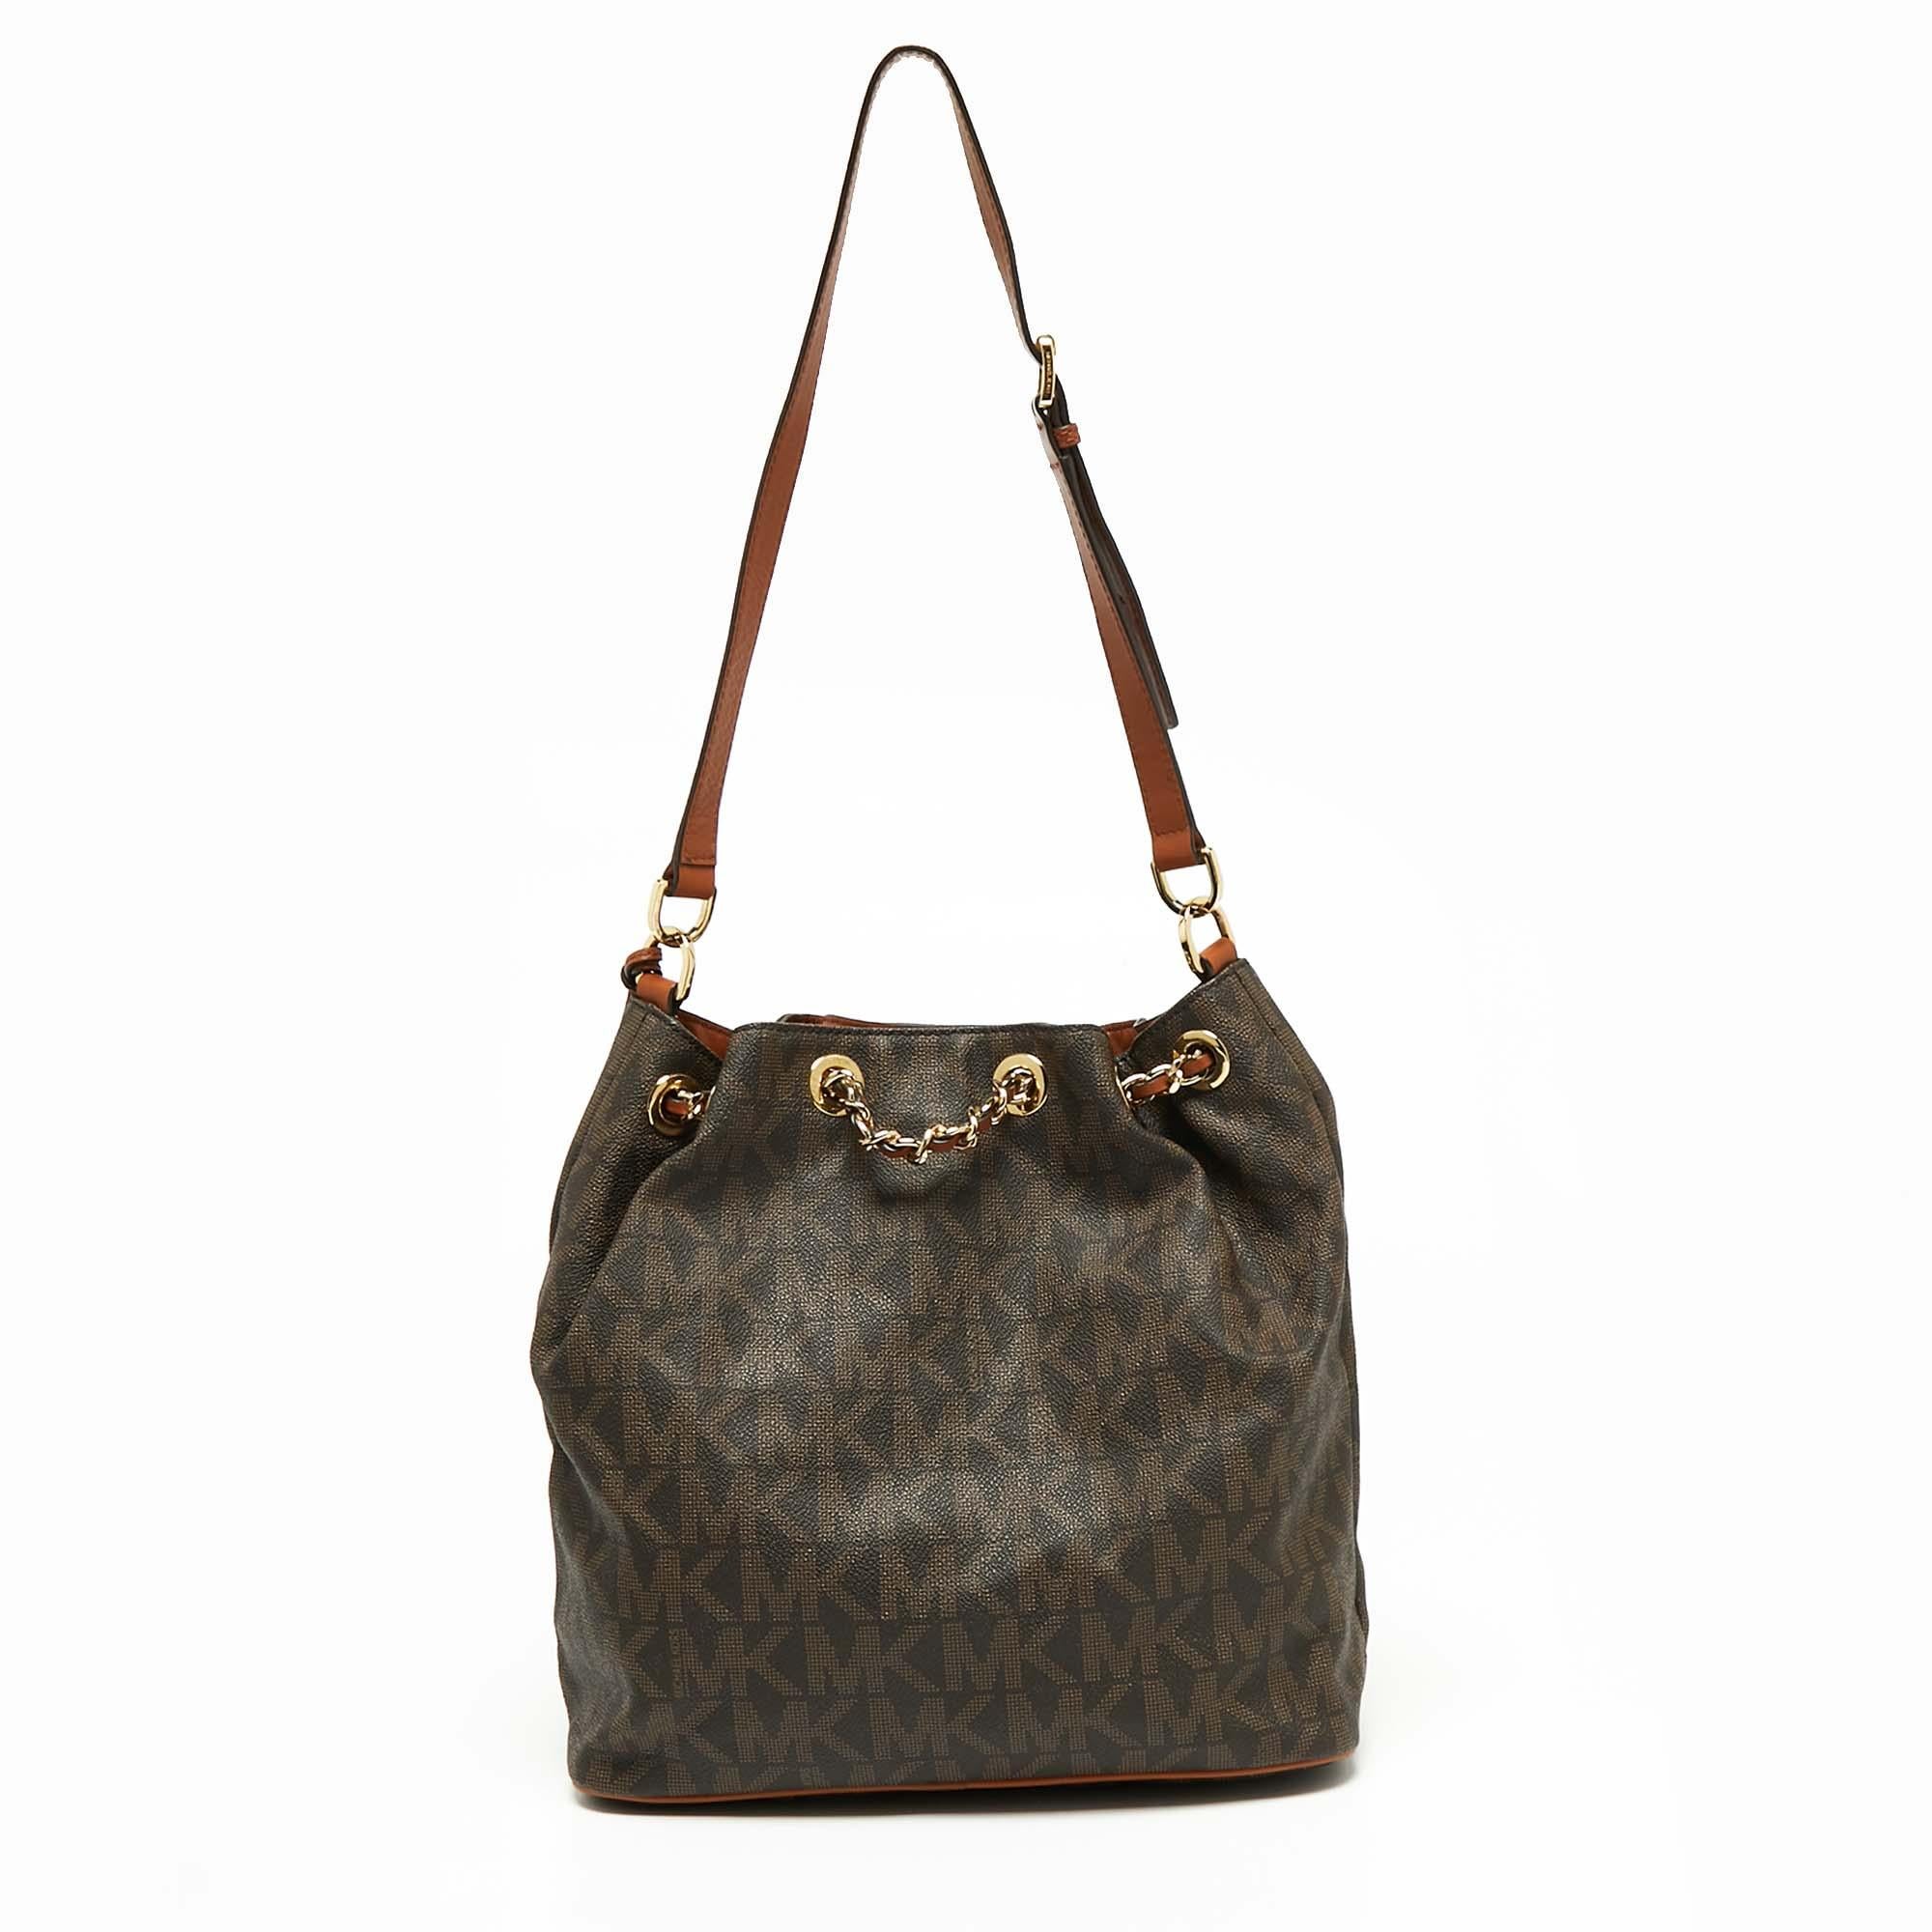 This Frankie bucket bag from MICHAEL Michael Kors is perfect for everyday use. Crafted from dark-brown Signature coated canvas and leather, it is styled with a drawstring closure, single handle, and gold-tone hardware. A signatory MK charm hangs